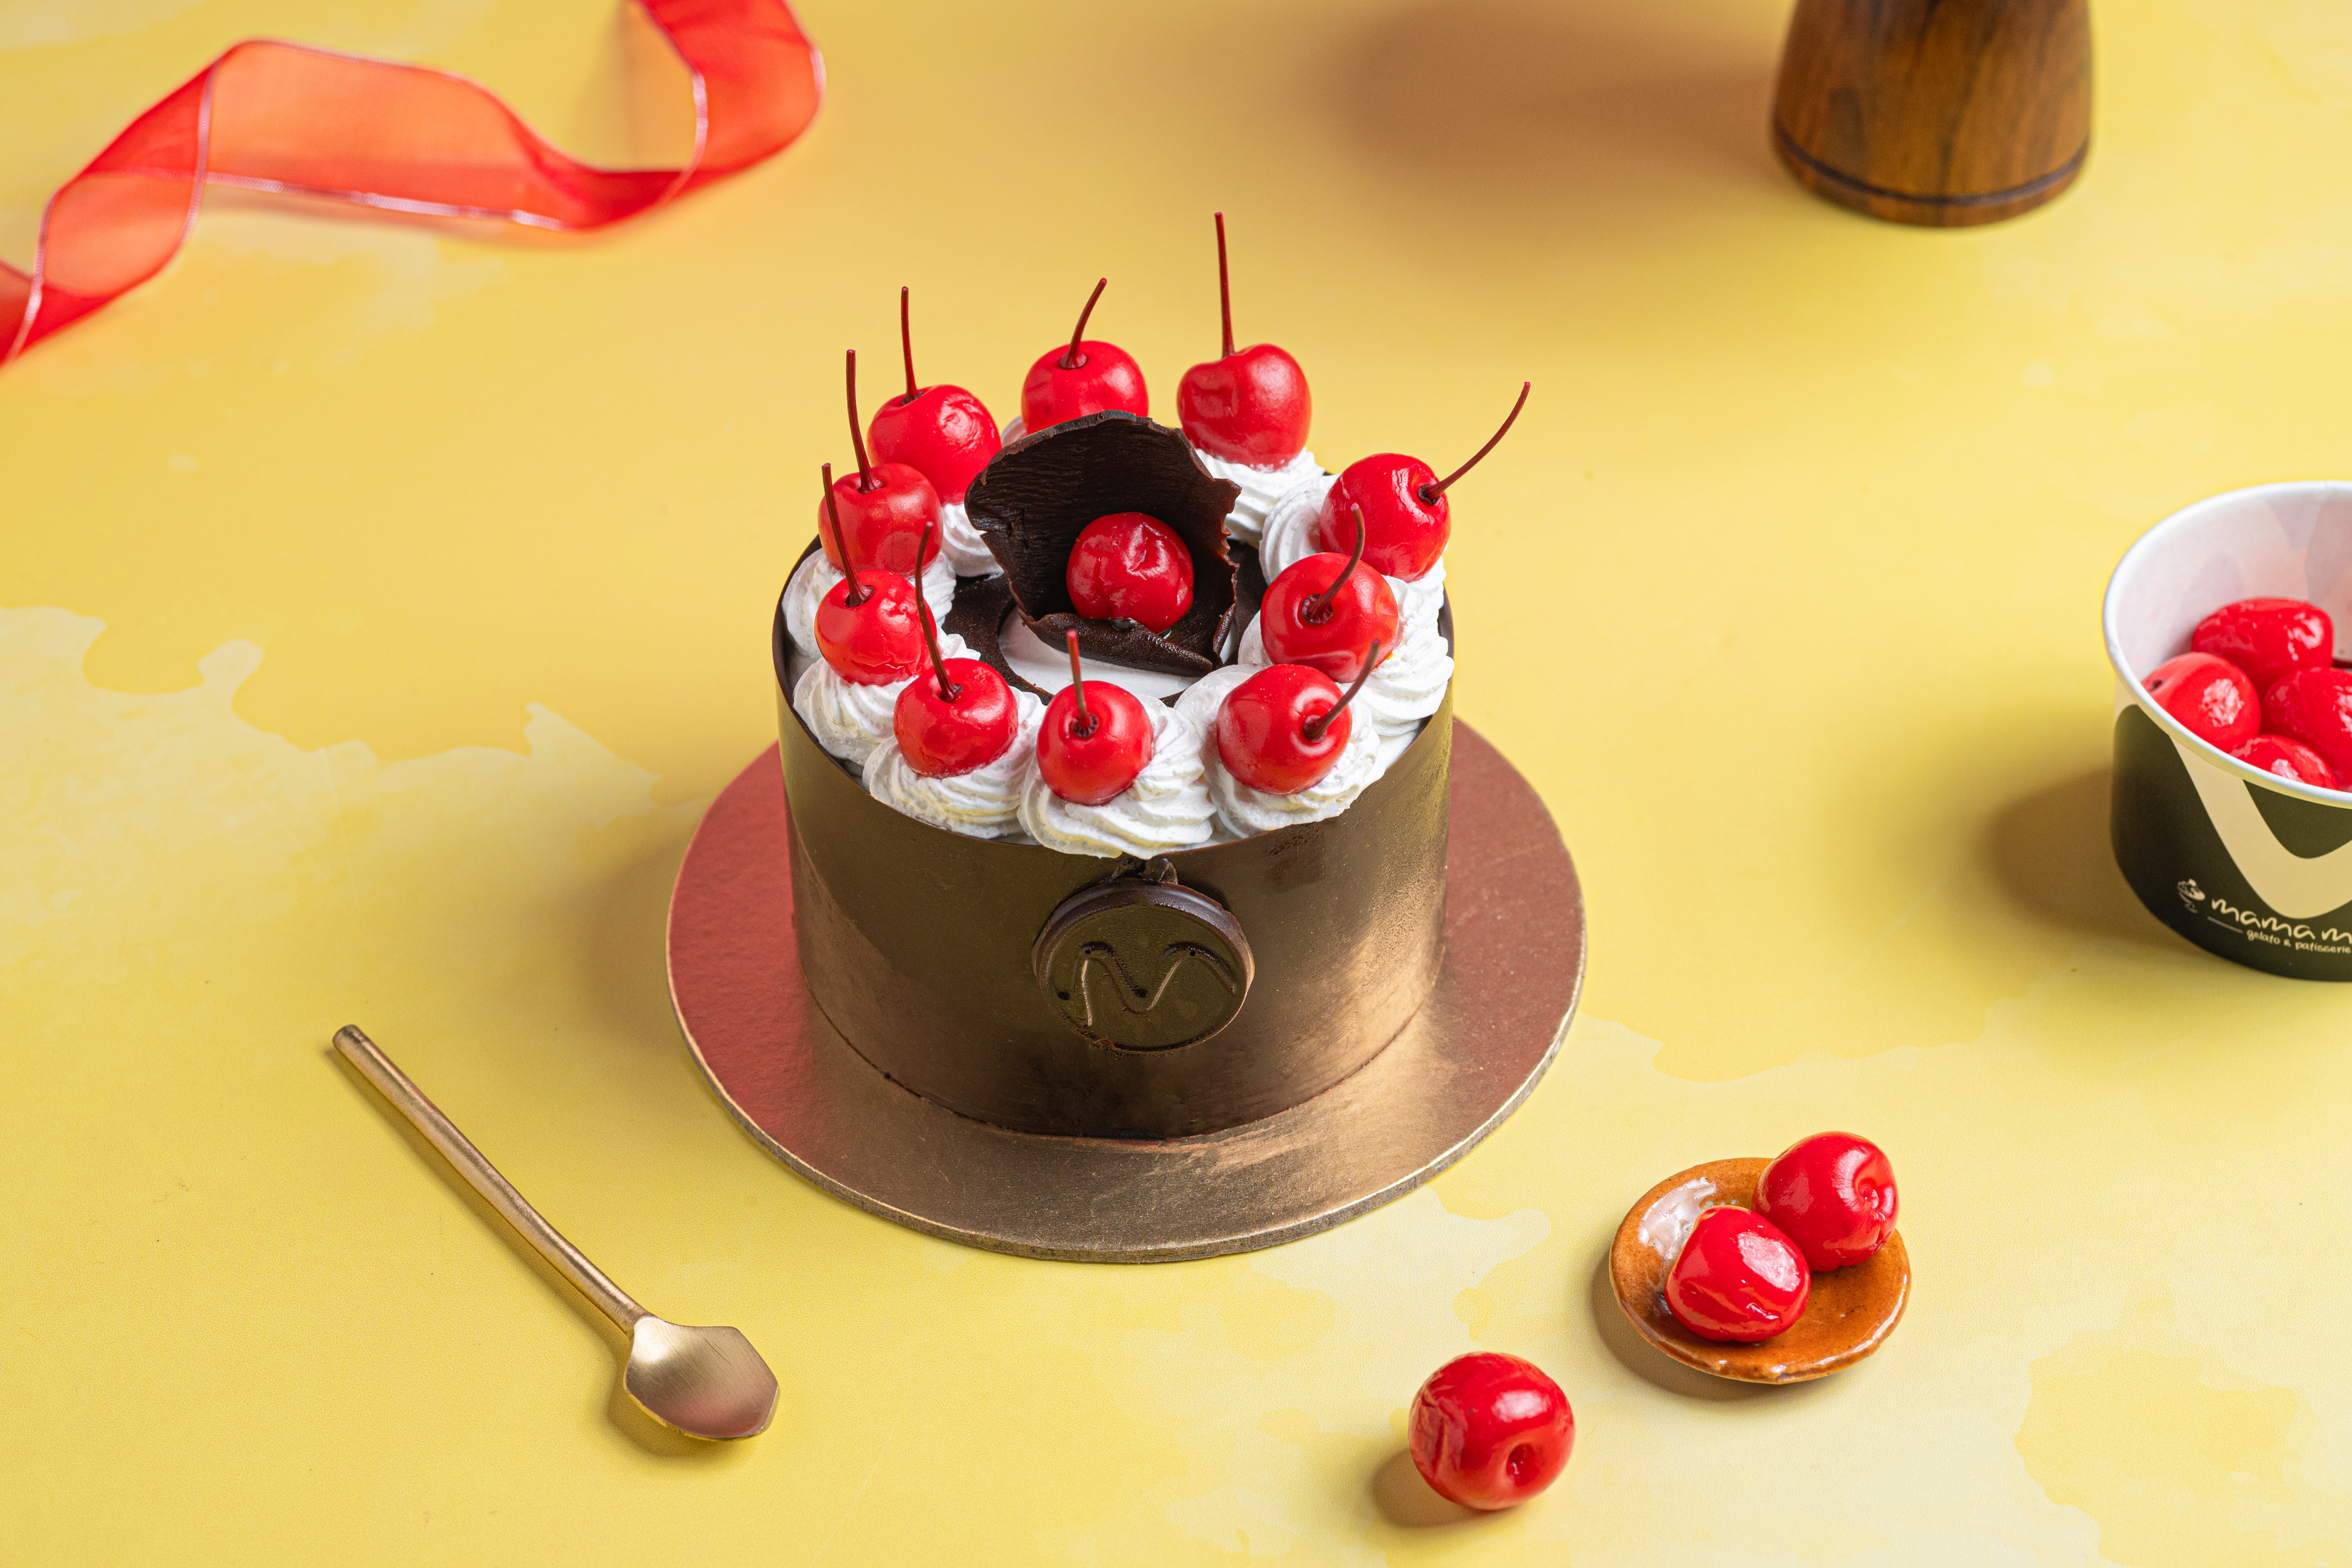 Indulgence Redefined: Eggless Black Forest Cake Recipe for Your Egg-Free Birthday Delights!